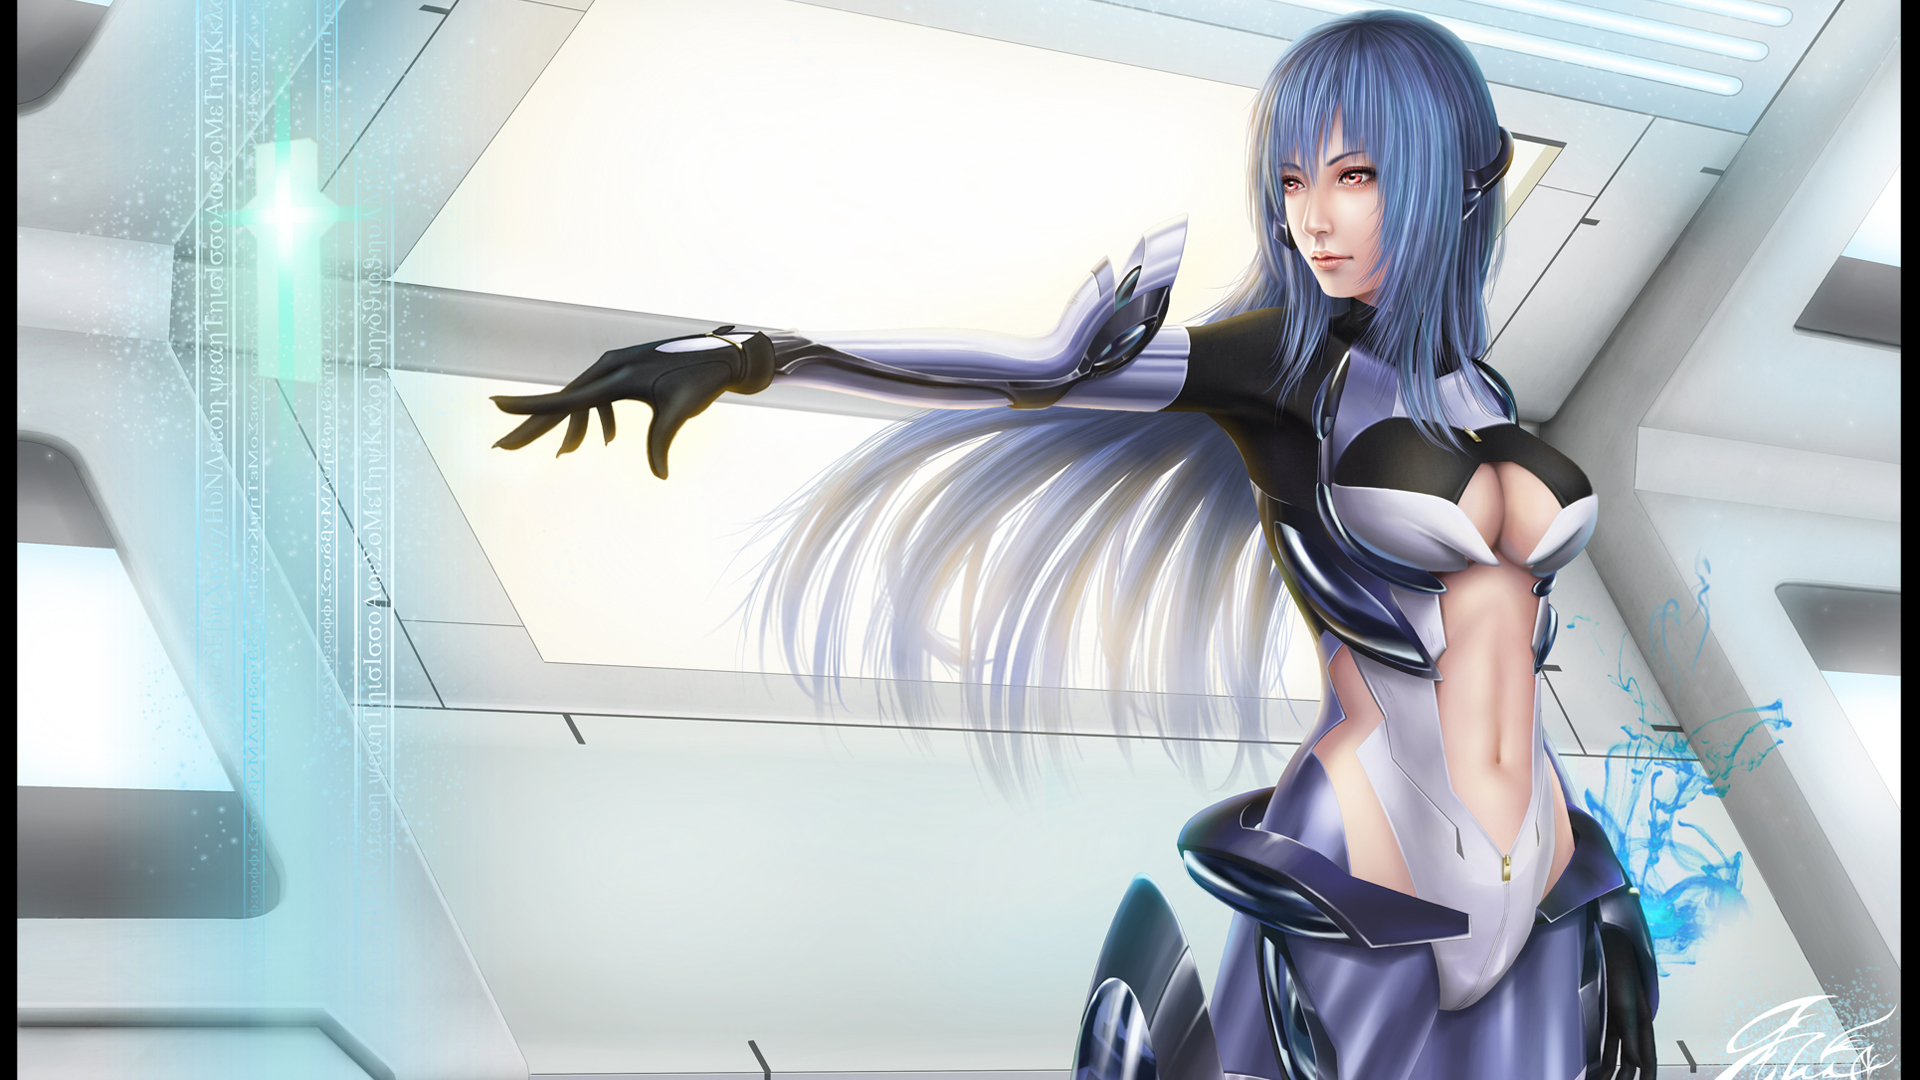 Xenosaga Kos Mos Cg 1080p From Shadow Of Death Hosted By Neoseeker